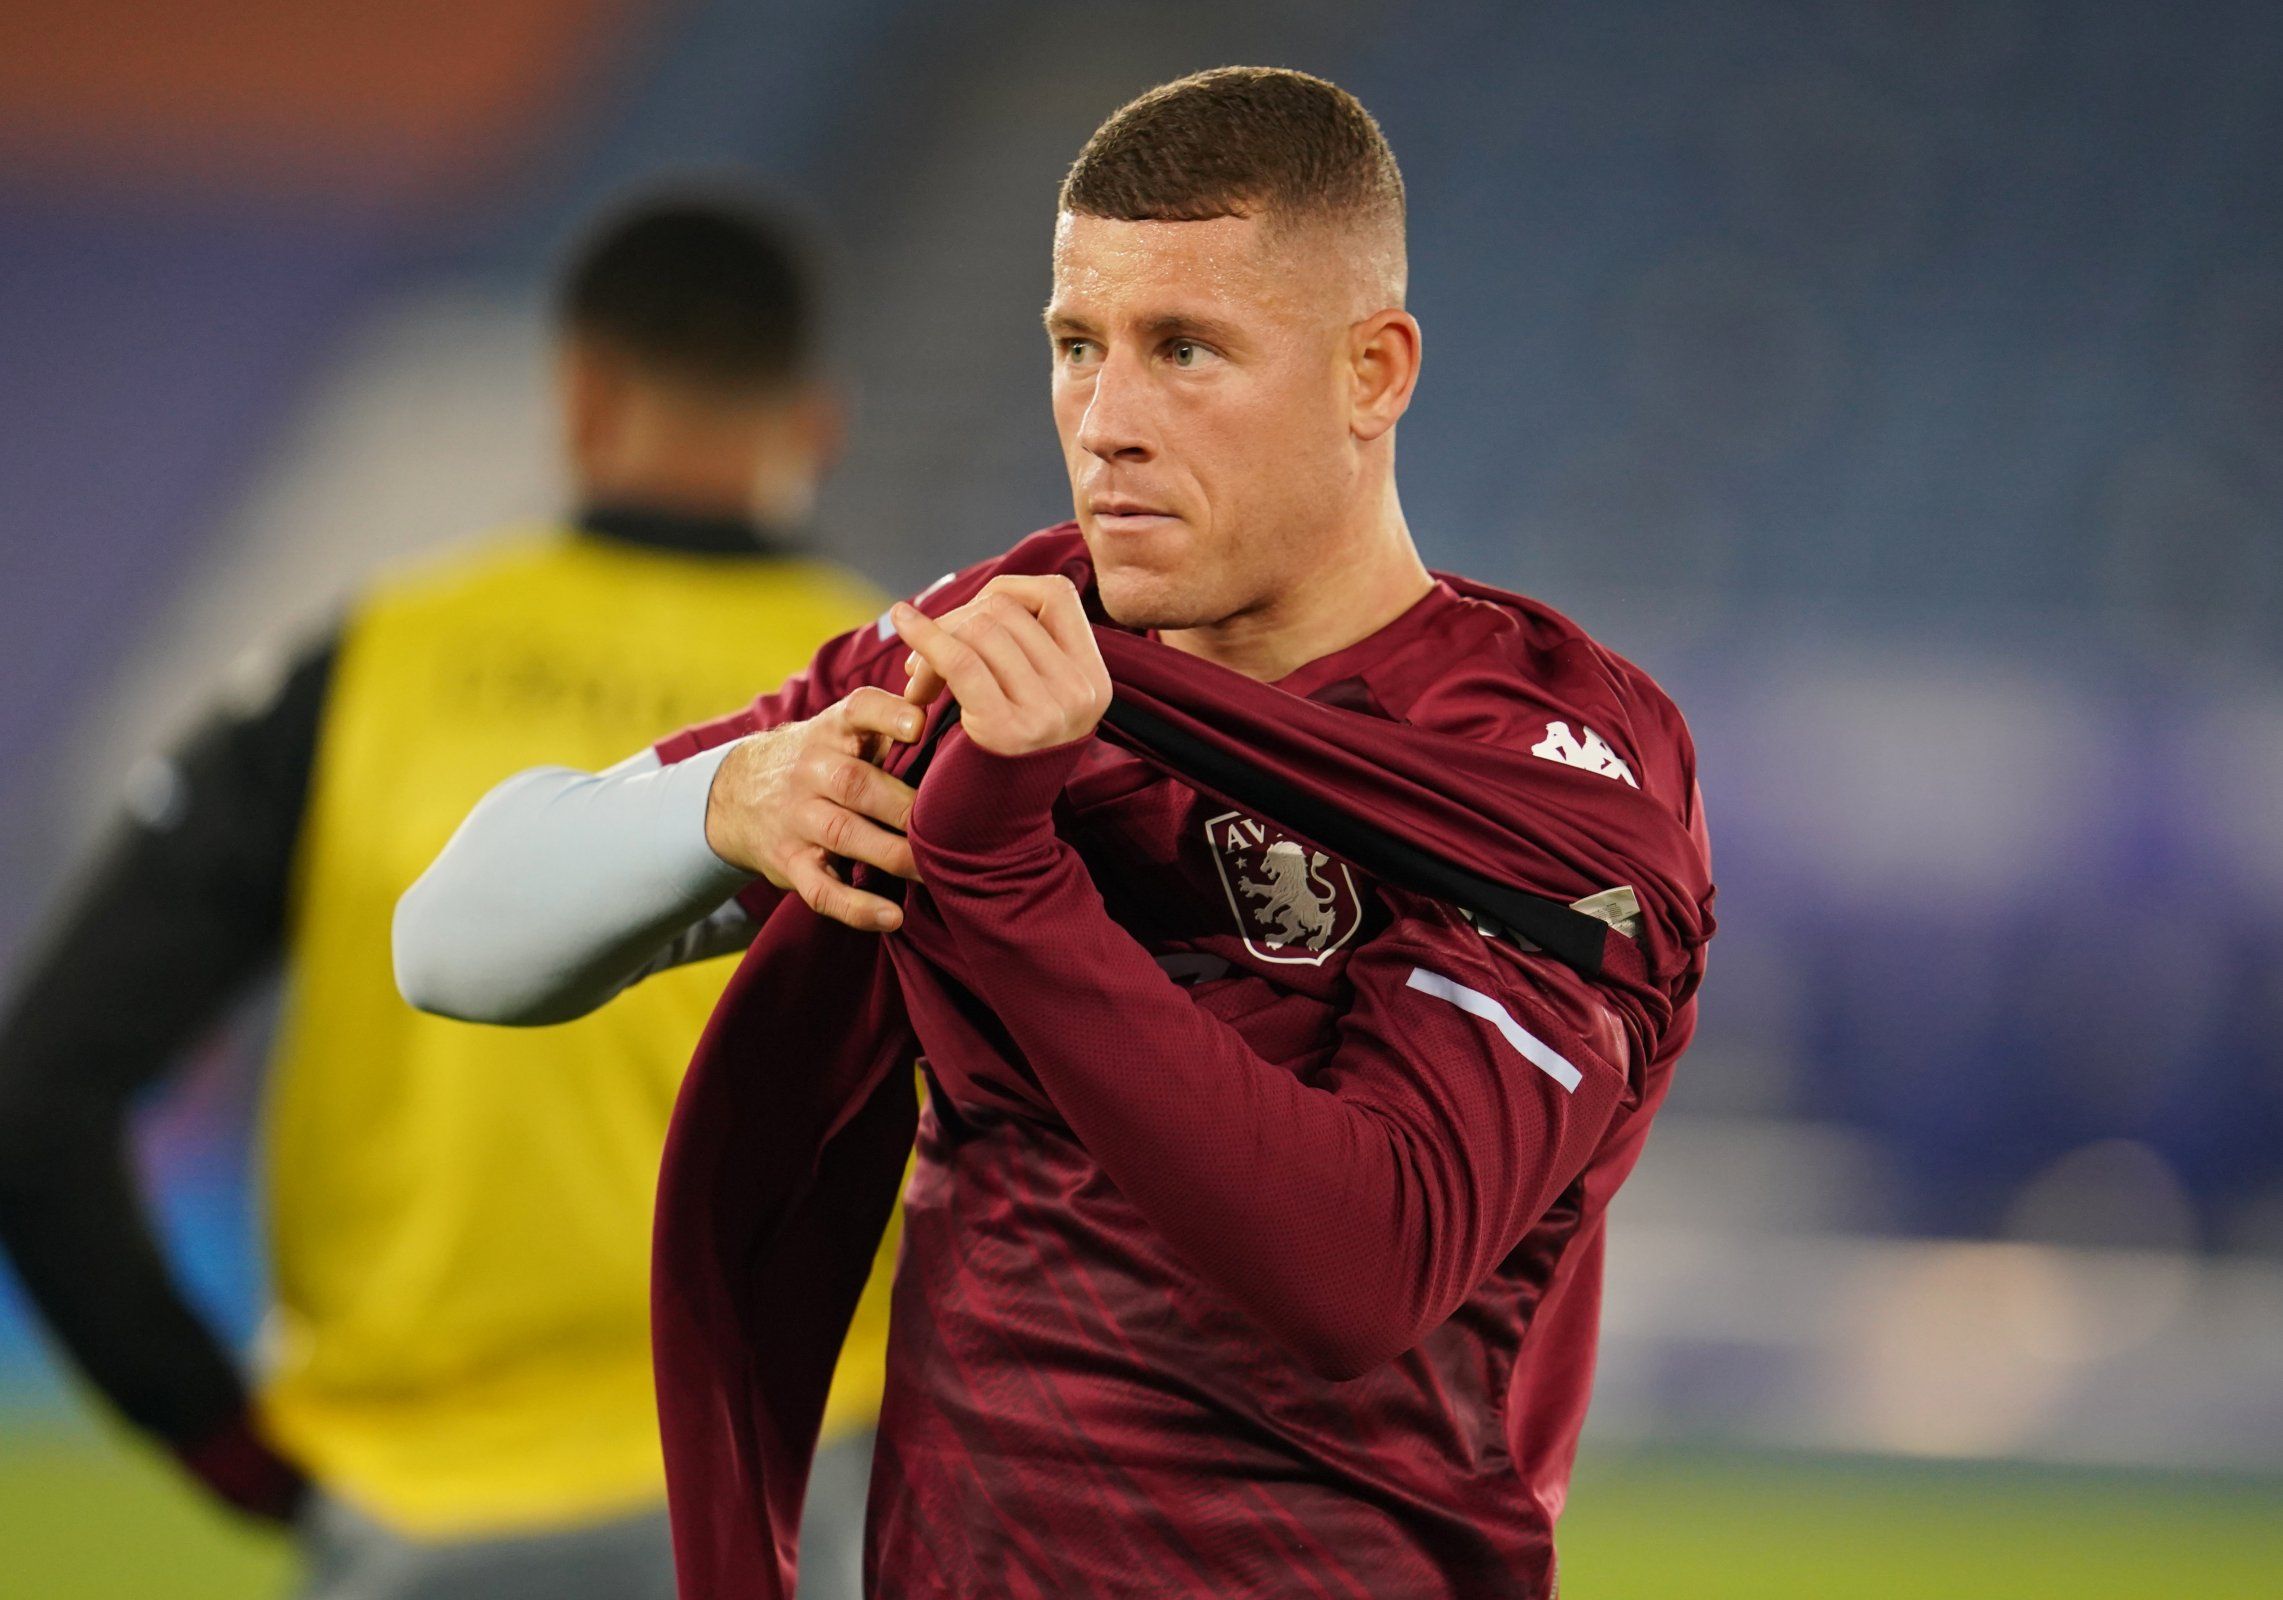 aston villa loanee ross barkley looks on during warm up against leicester city in the premier league